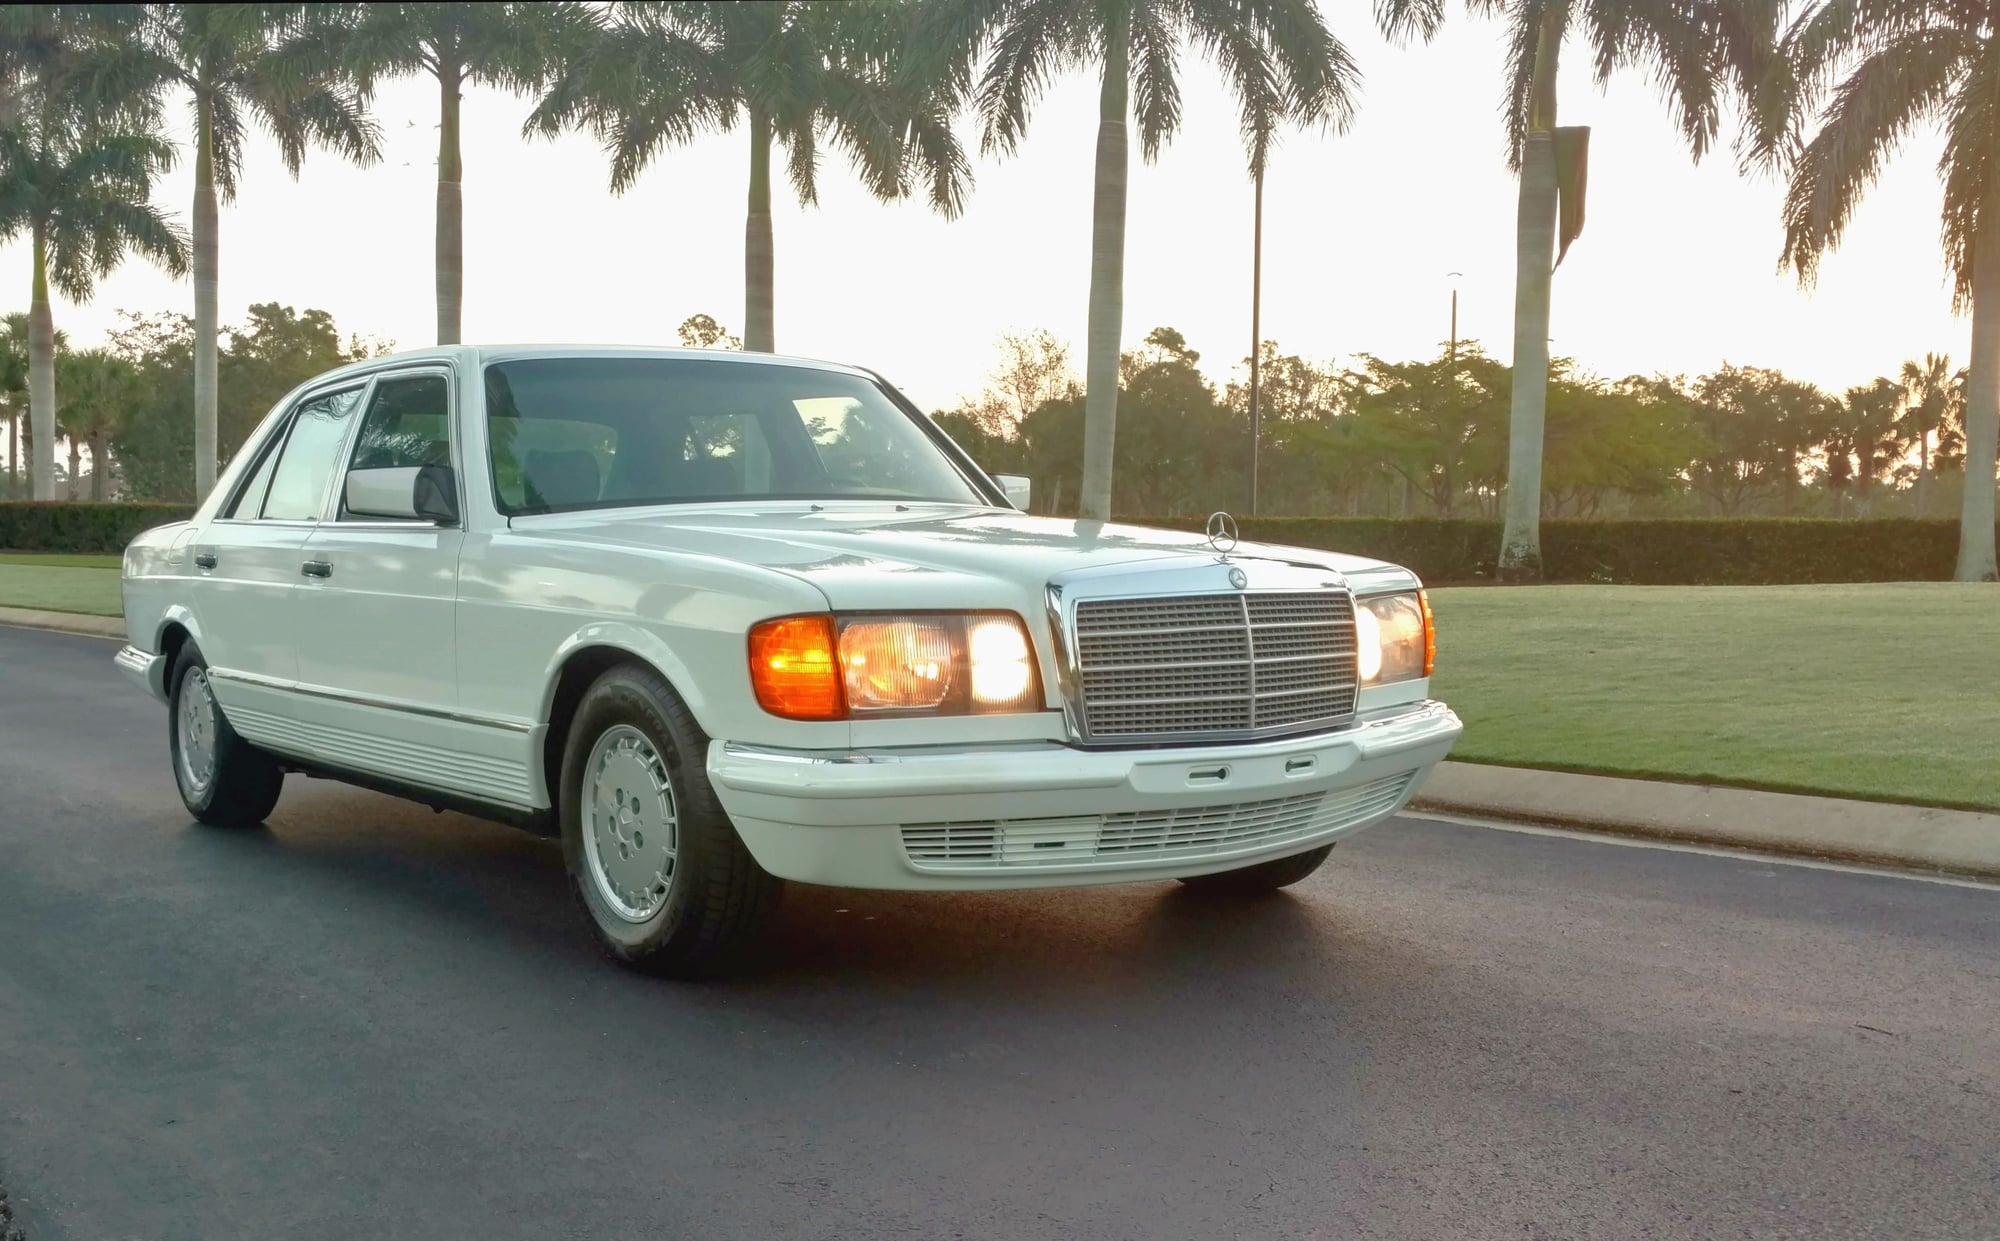 1983 Mercedes-Benz 380SEL - 1983 5-speed manual, Euro 280SE AMG (Documented) - Used - VIN 00000000000000000 - 64,949 Miles - 6 cyl - 2WD - Manual - Sedan - White - Fort Myers, FL 33913, United States